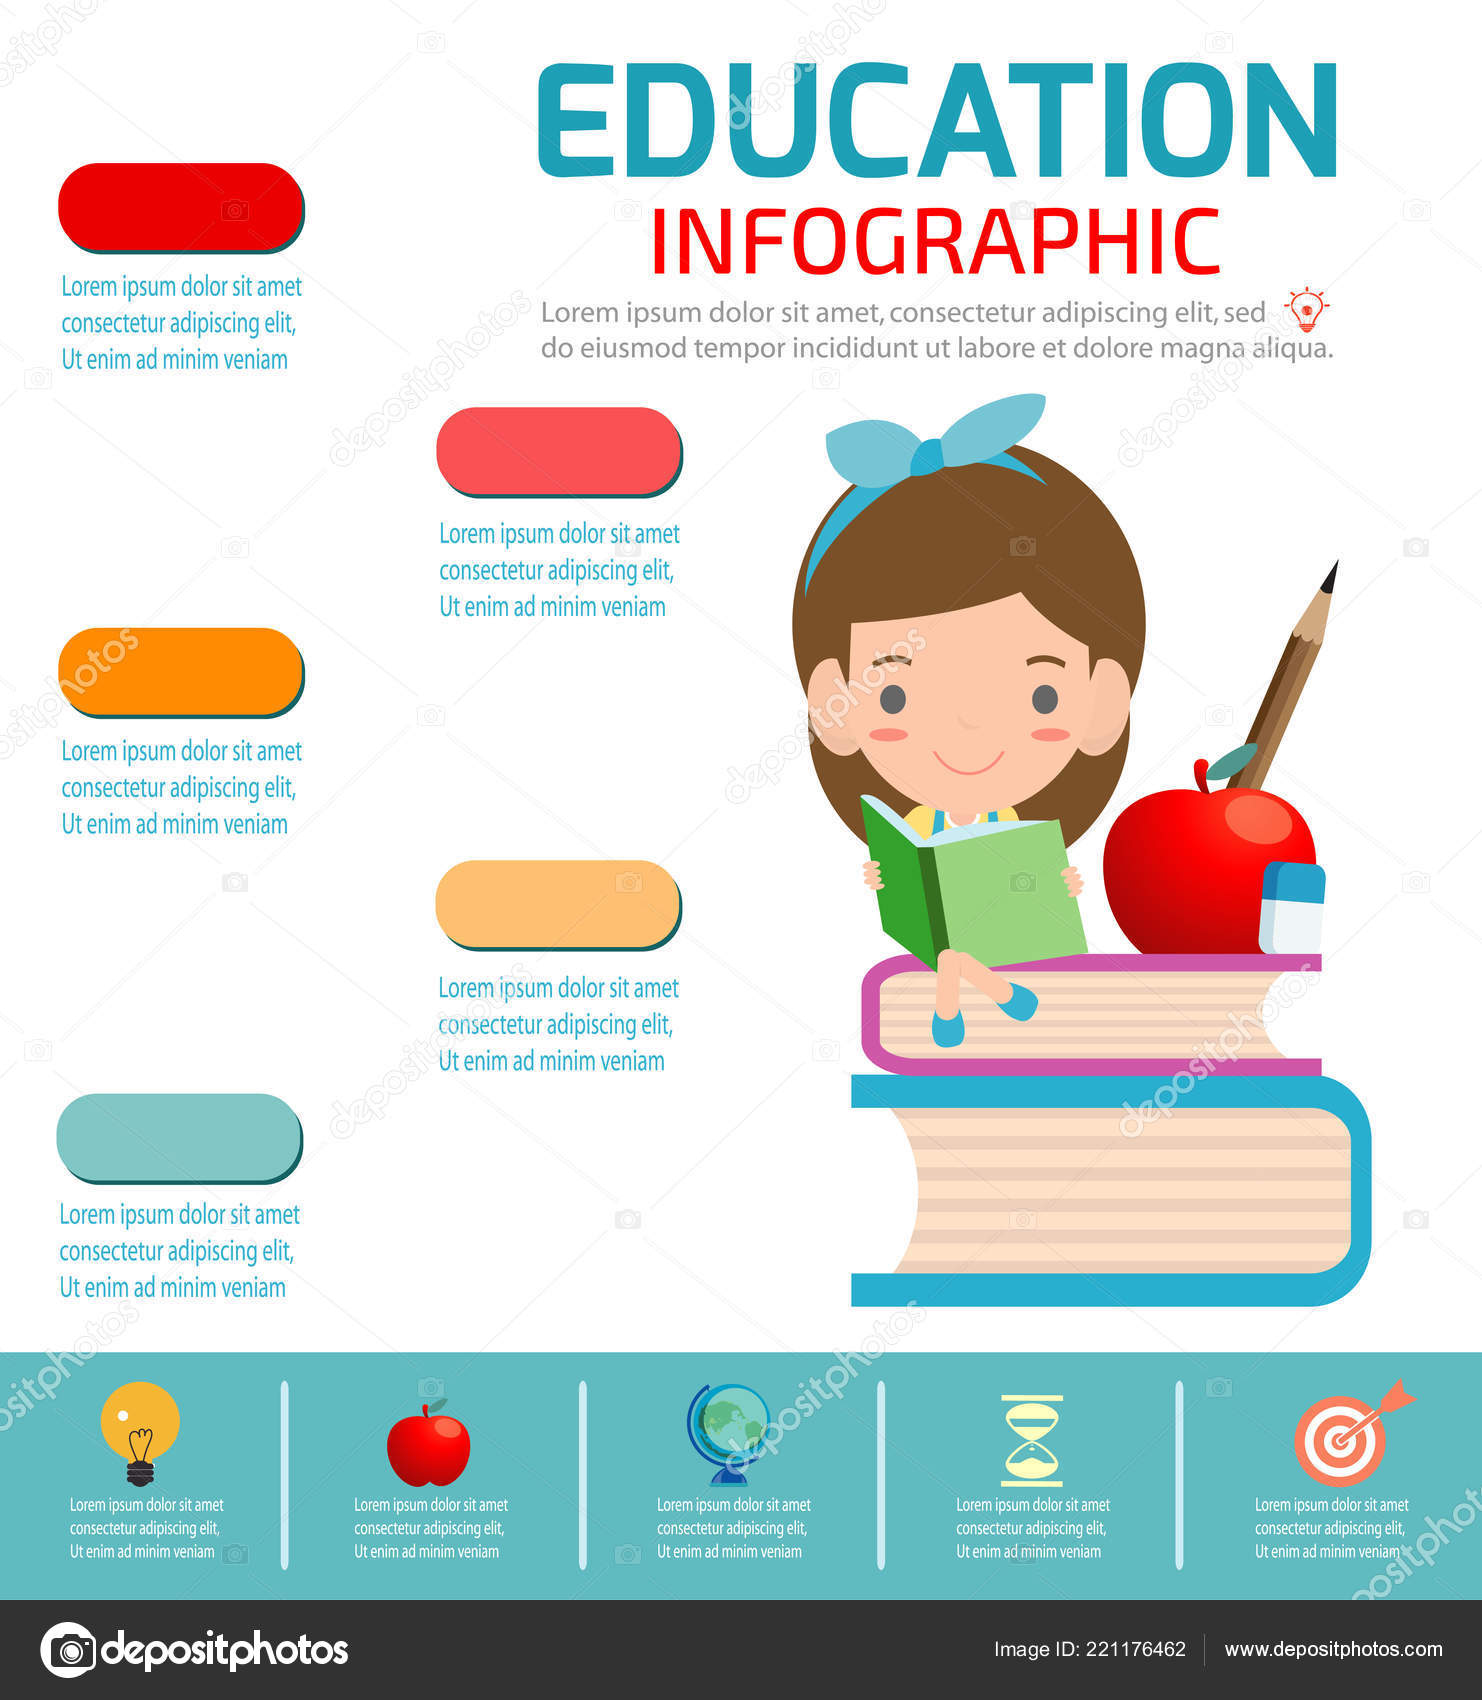 Education Infographic Template Design Education Concept Vector Illustration Stock Vector C Phanuchat10700 Gmail Com 221176462,Living Room Middle Class Kerala Indian Home Interior Design